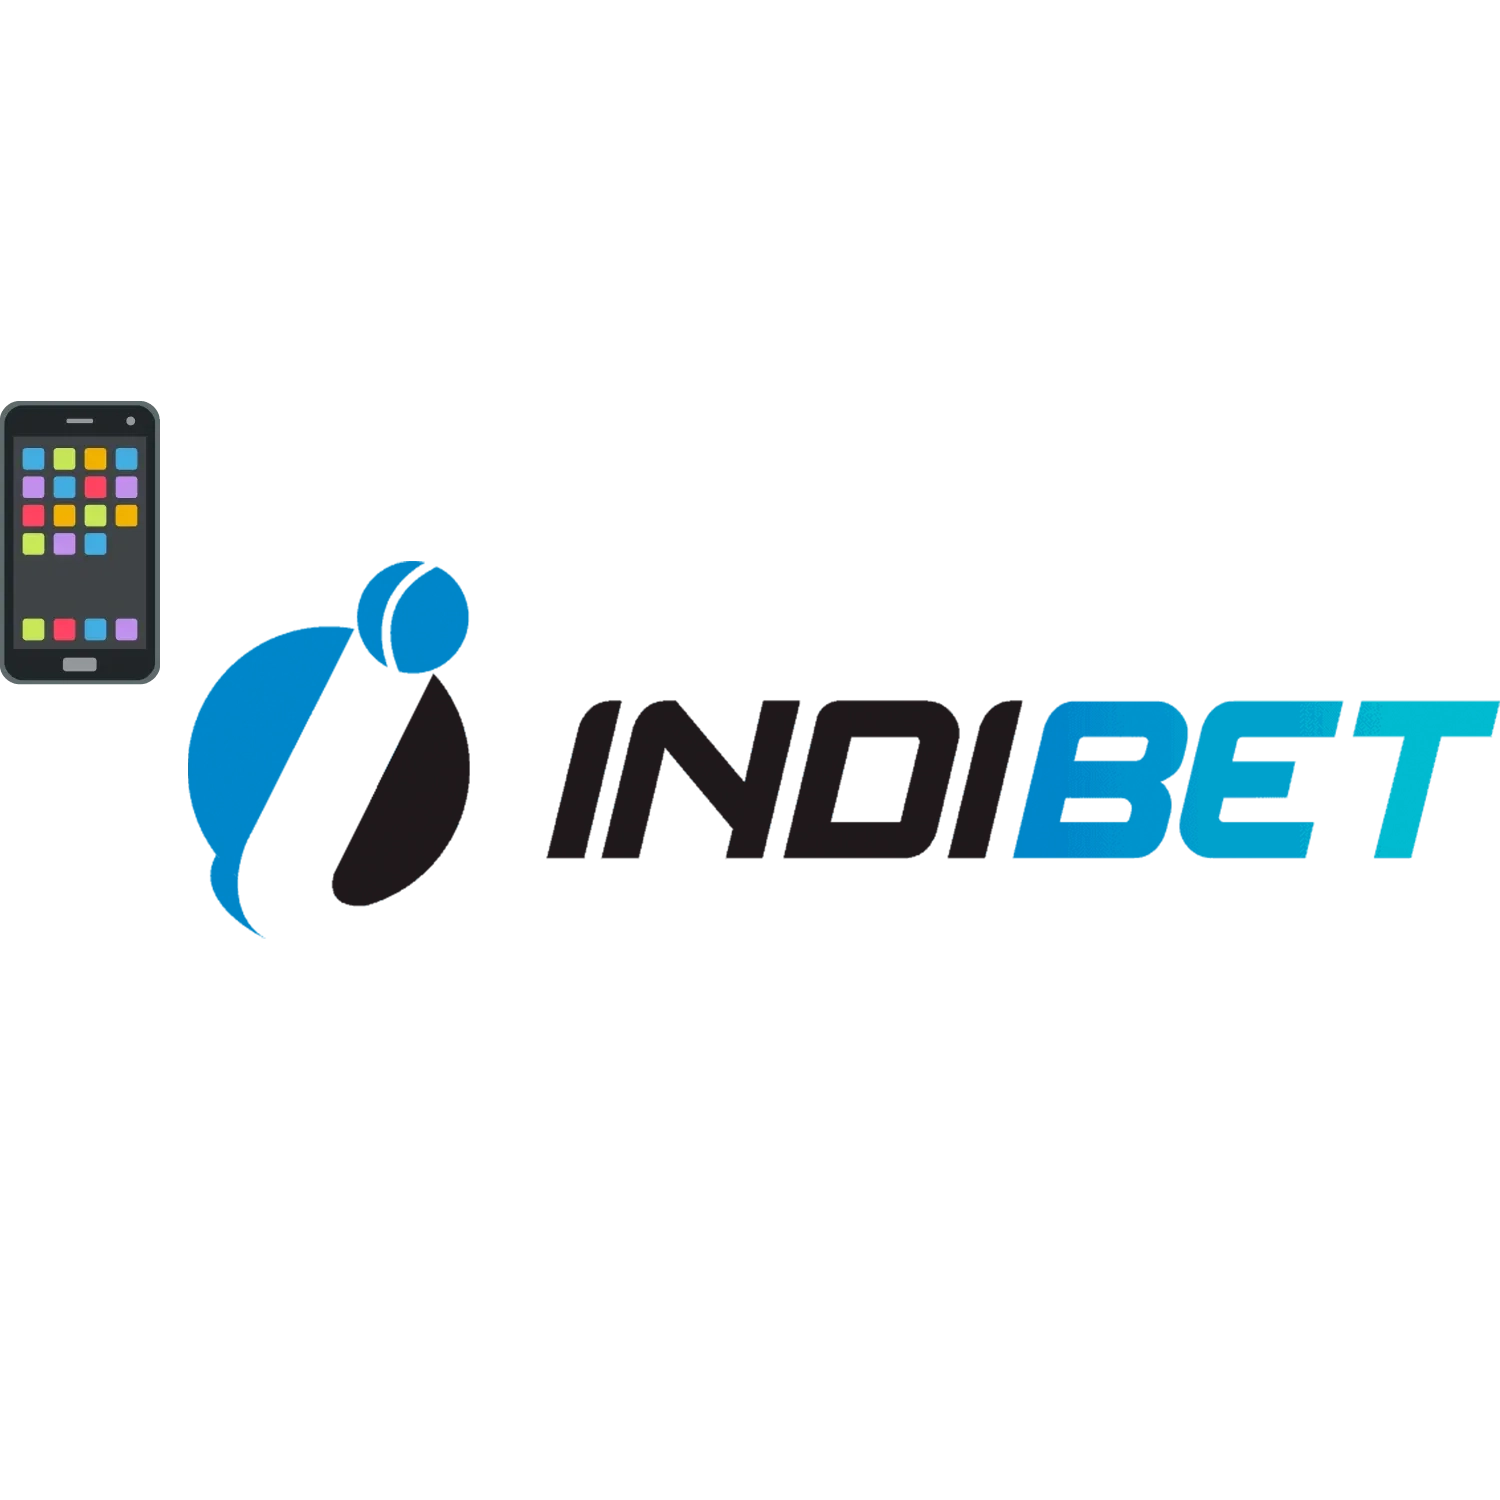 Indibet is a good choice for online betting and casino in Bangladesh.